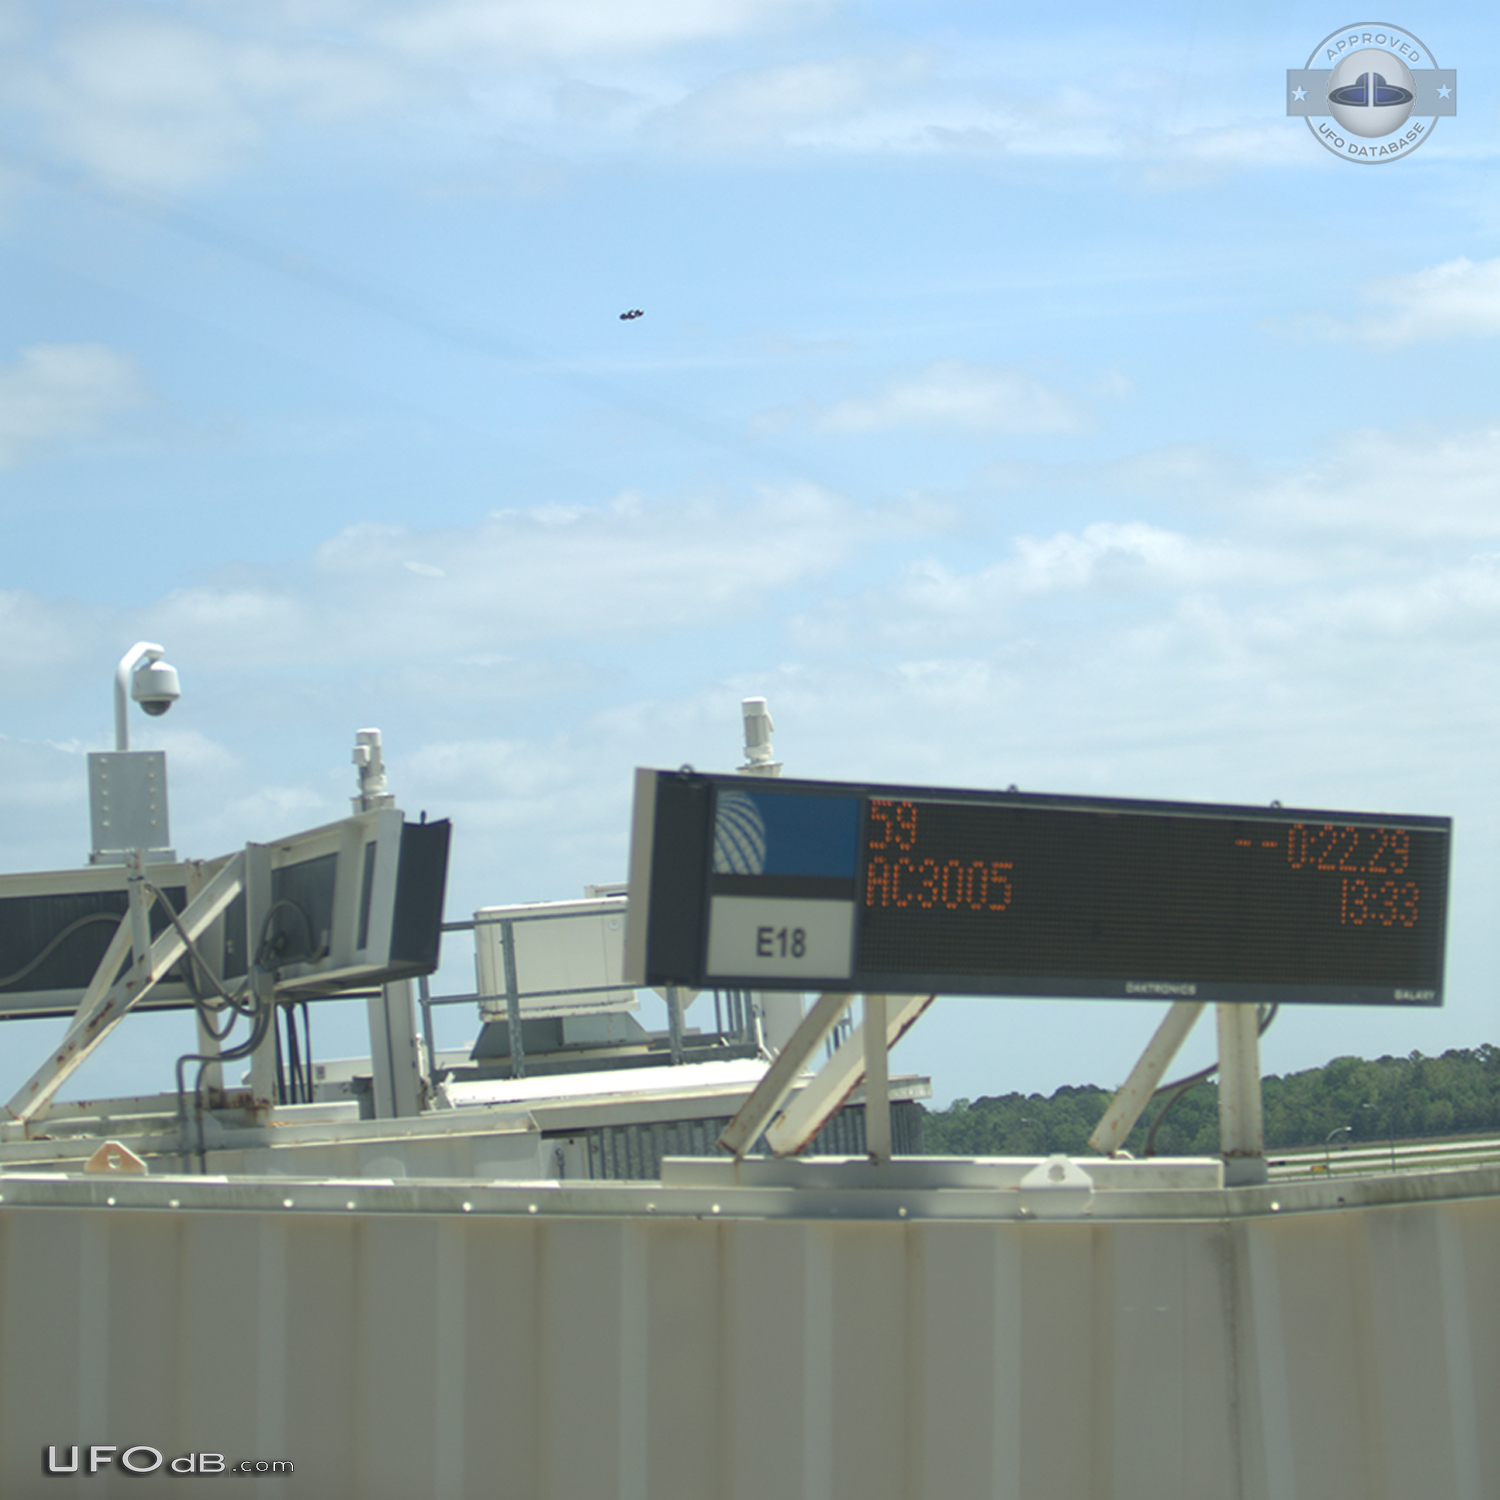 UFO with 4 Spheres over Austin Bergstrom Airport in Texas USA 2014 UFO Picture #670-2